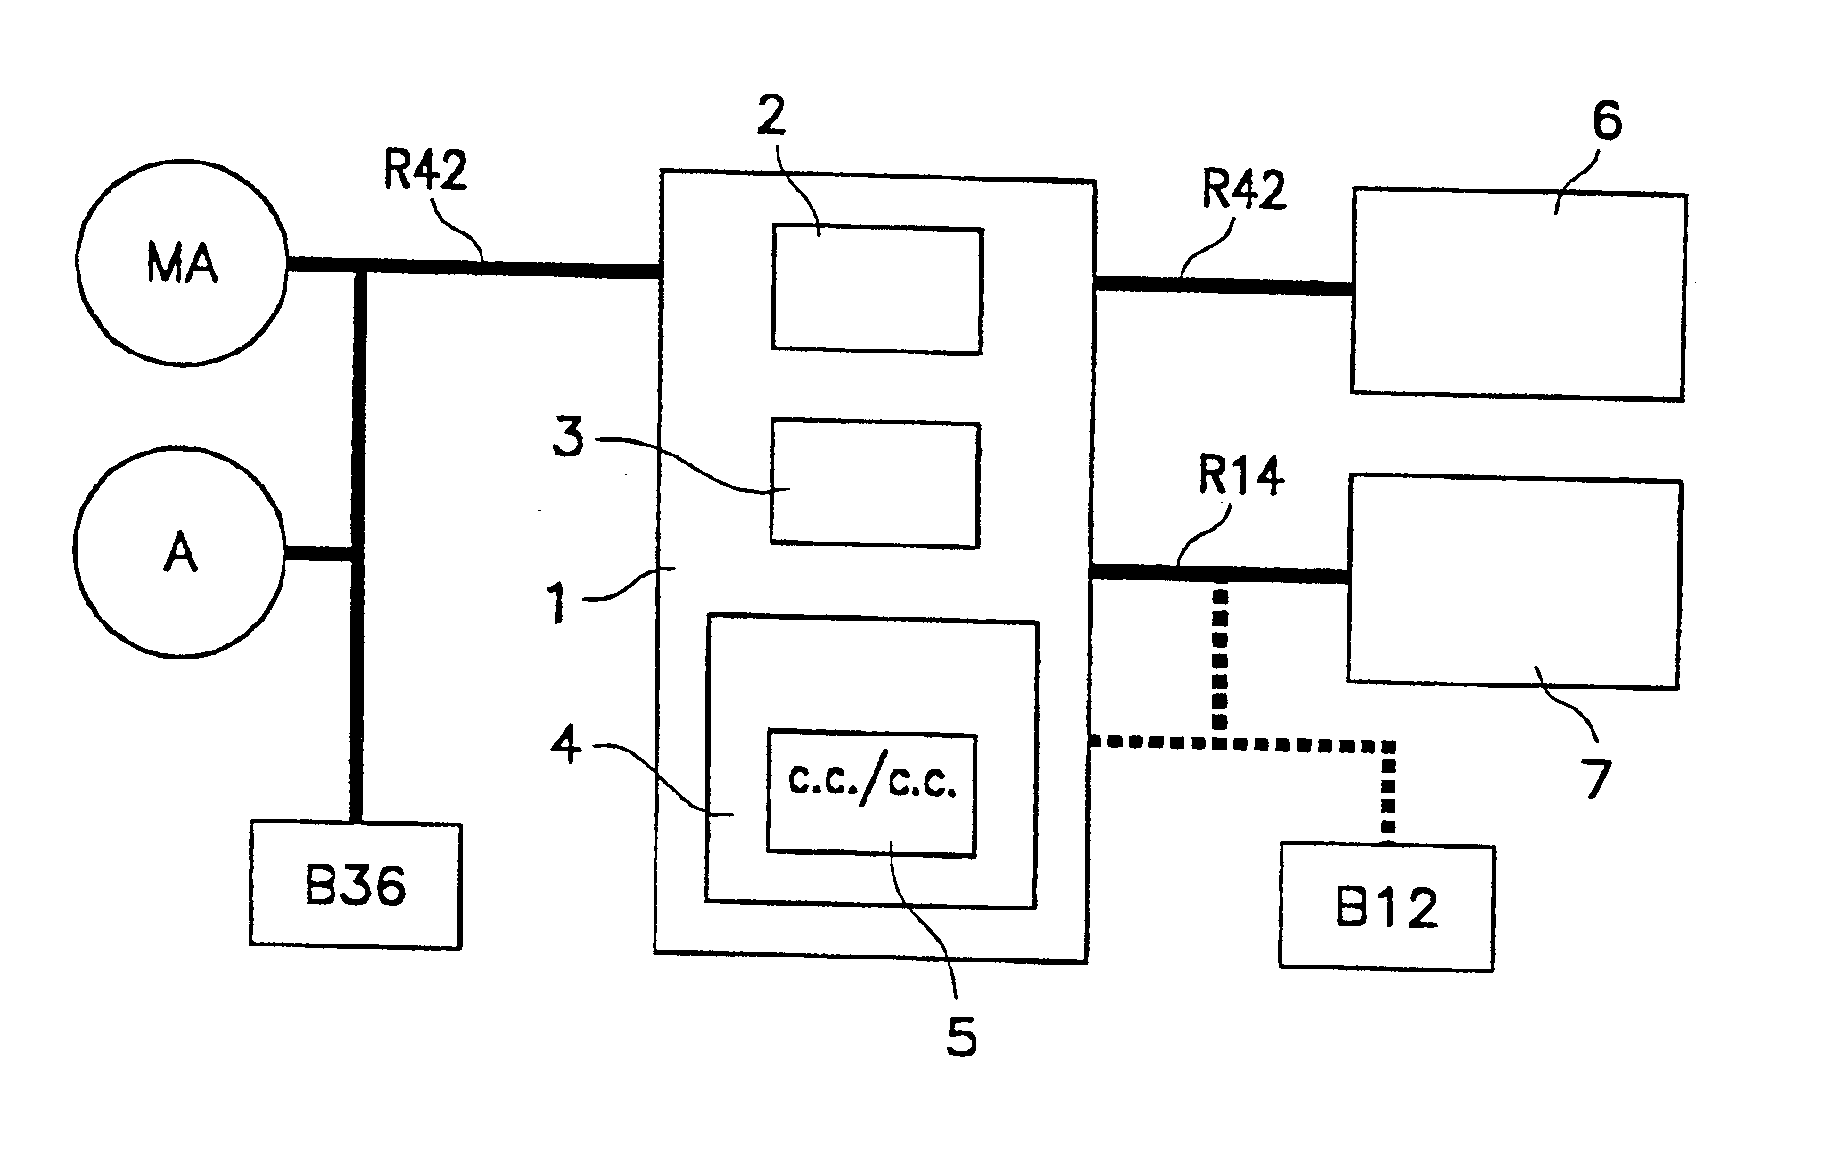 Electrical distribution box for vehicles having two networks with different voltage levels